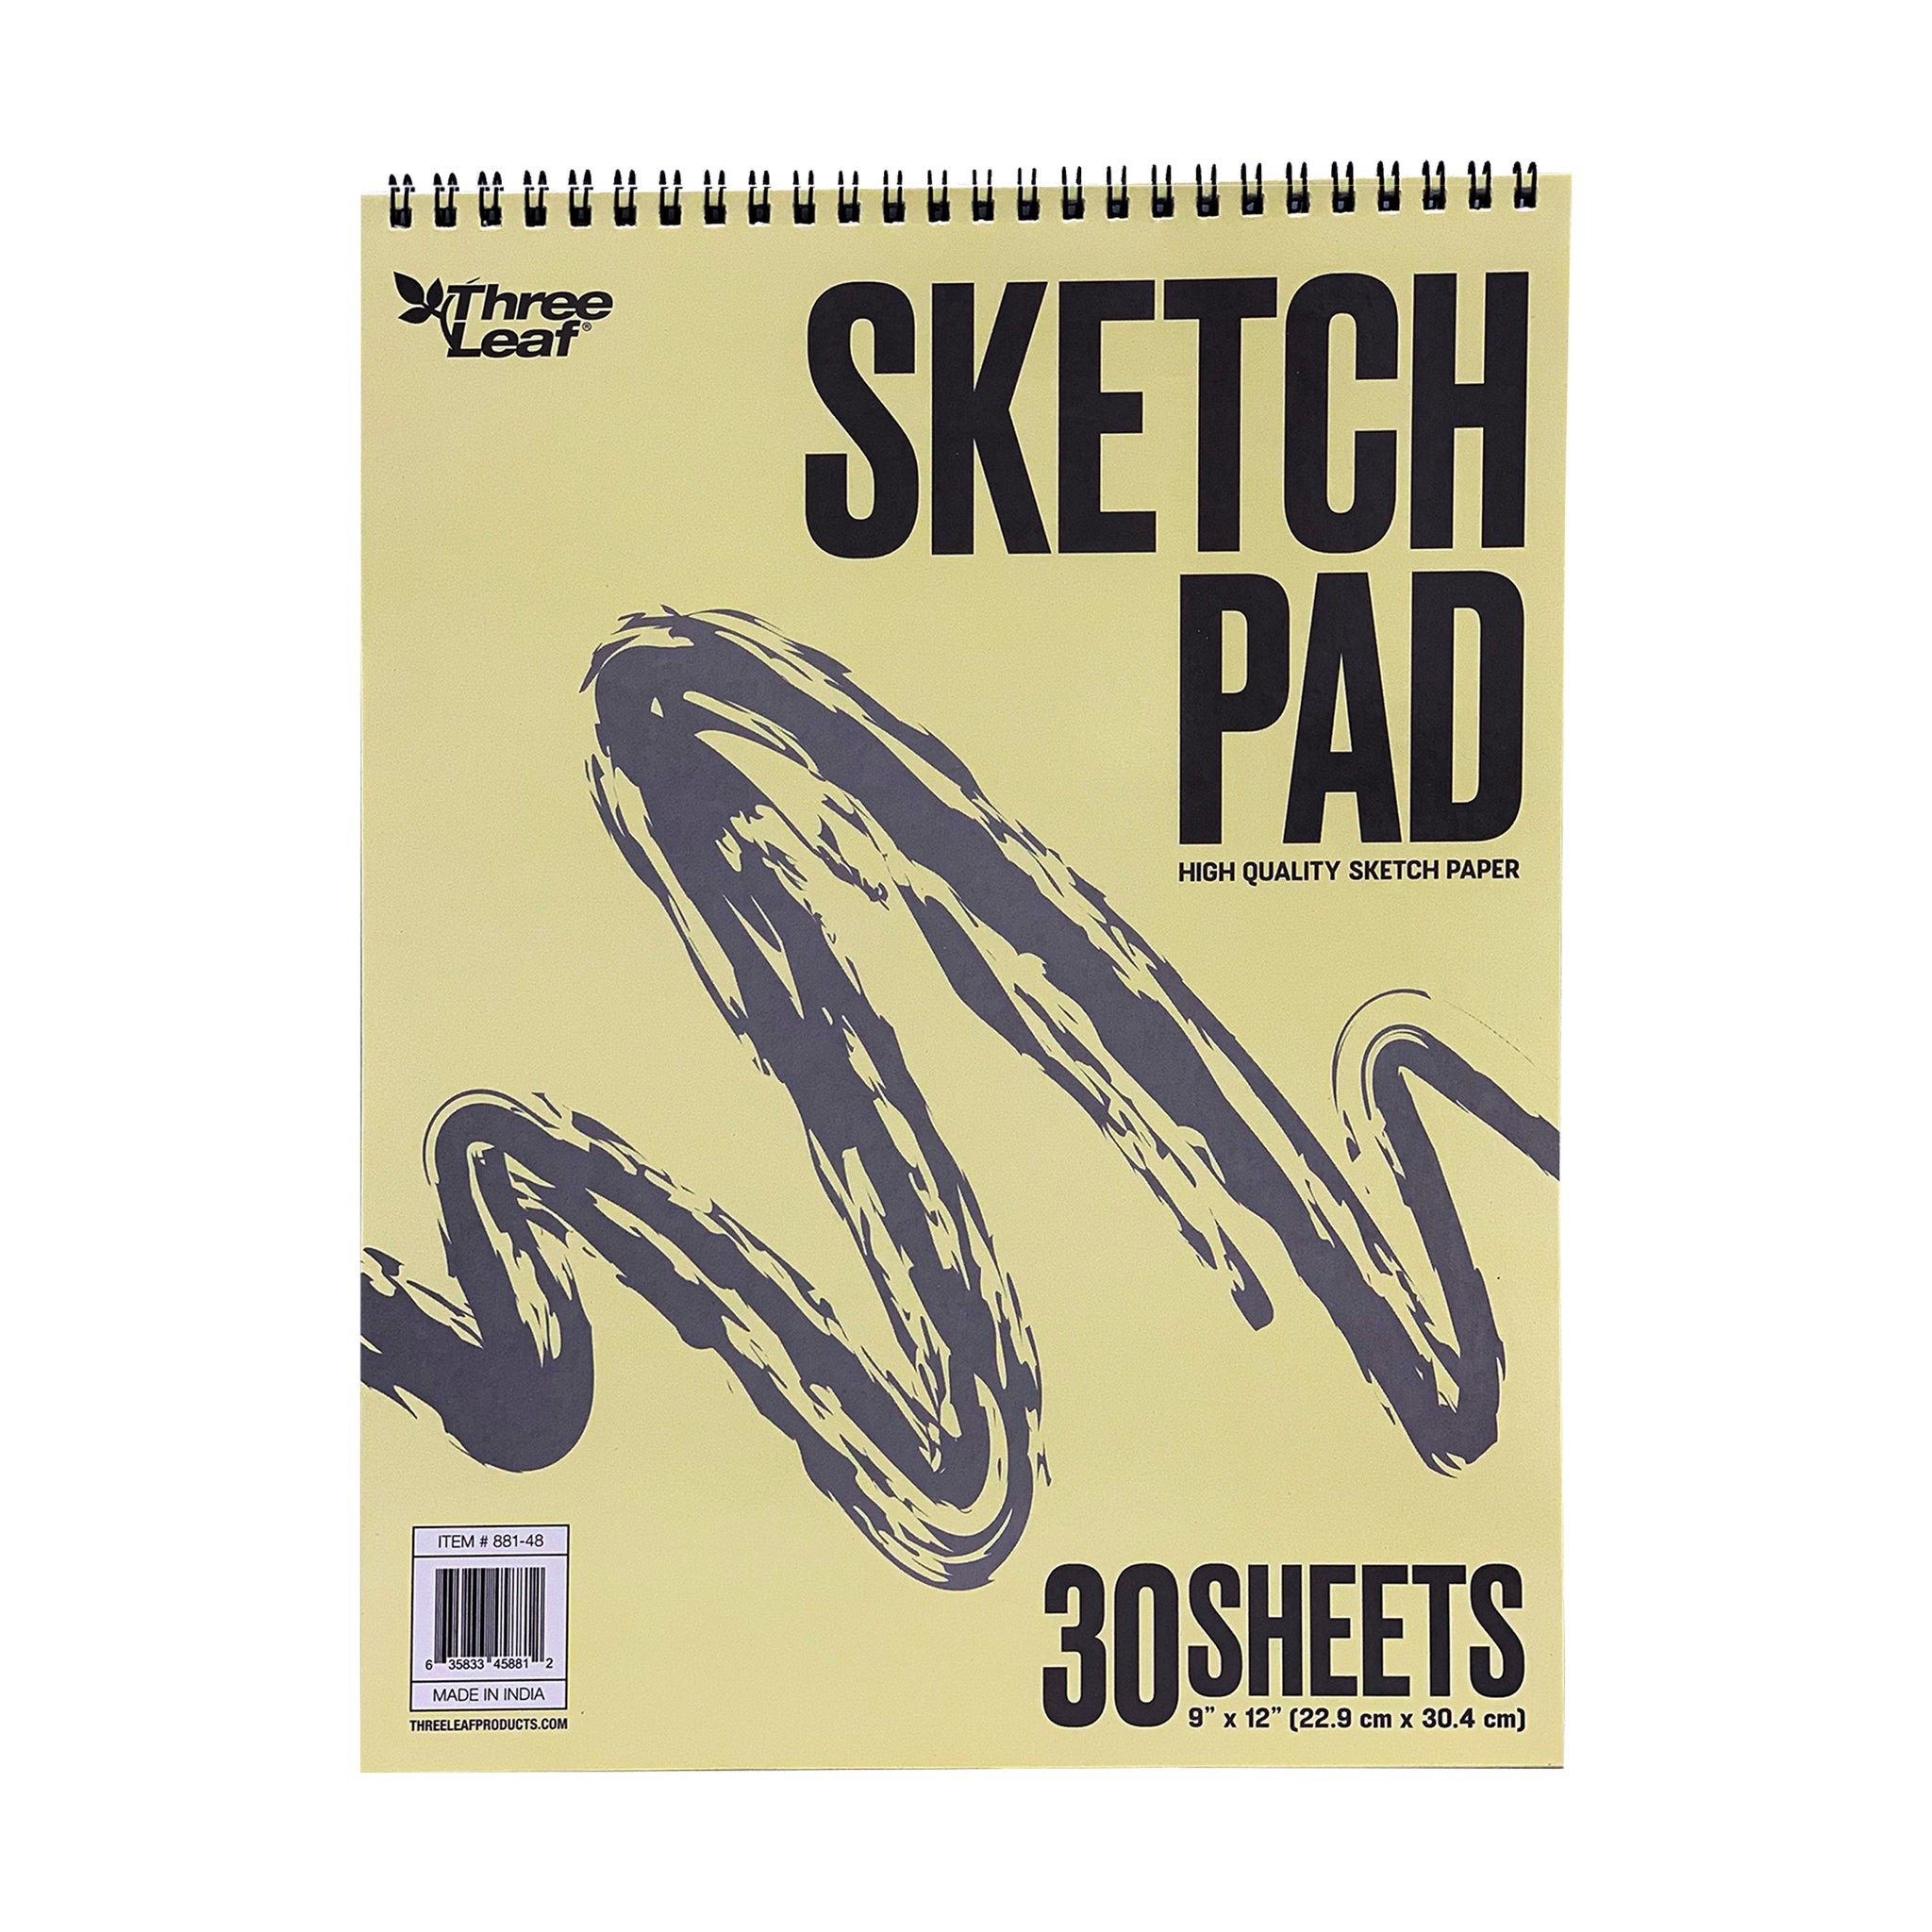 High-Quality Premium Multifunctional Sketchbook - 9x12 inches - 4